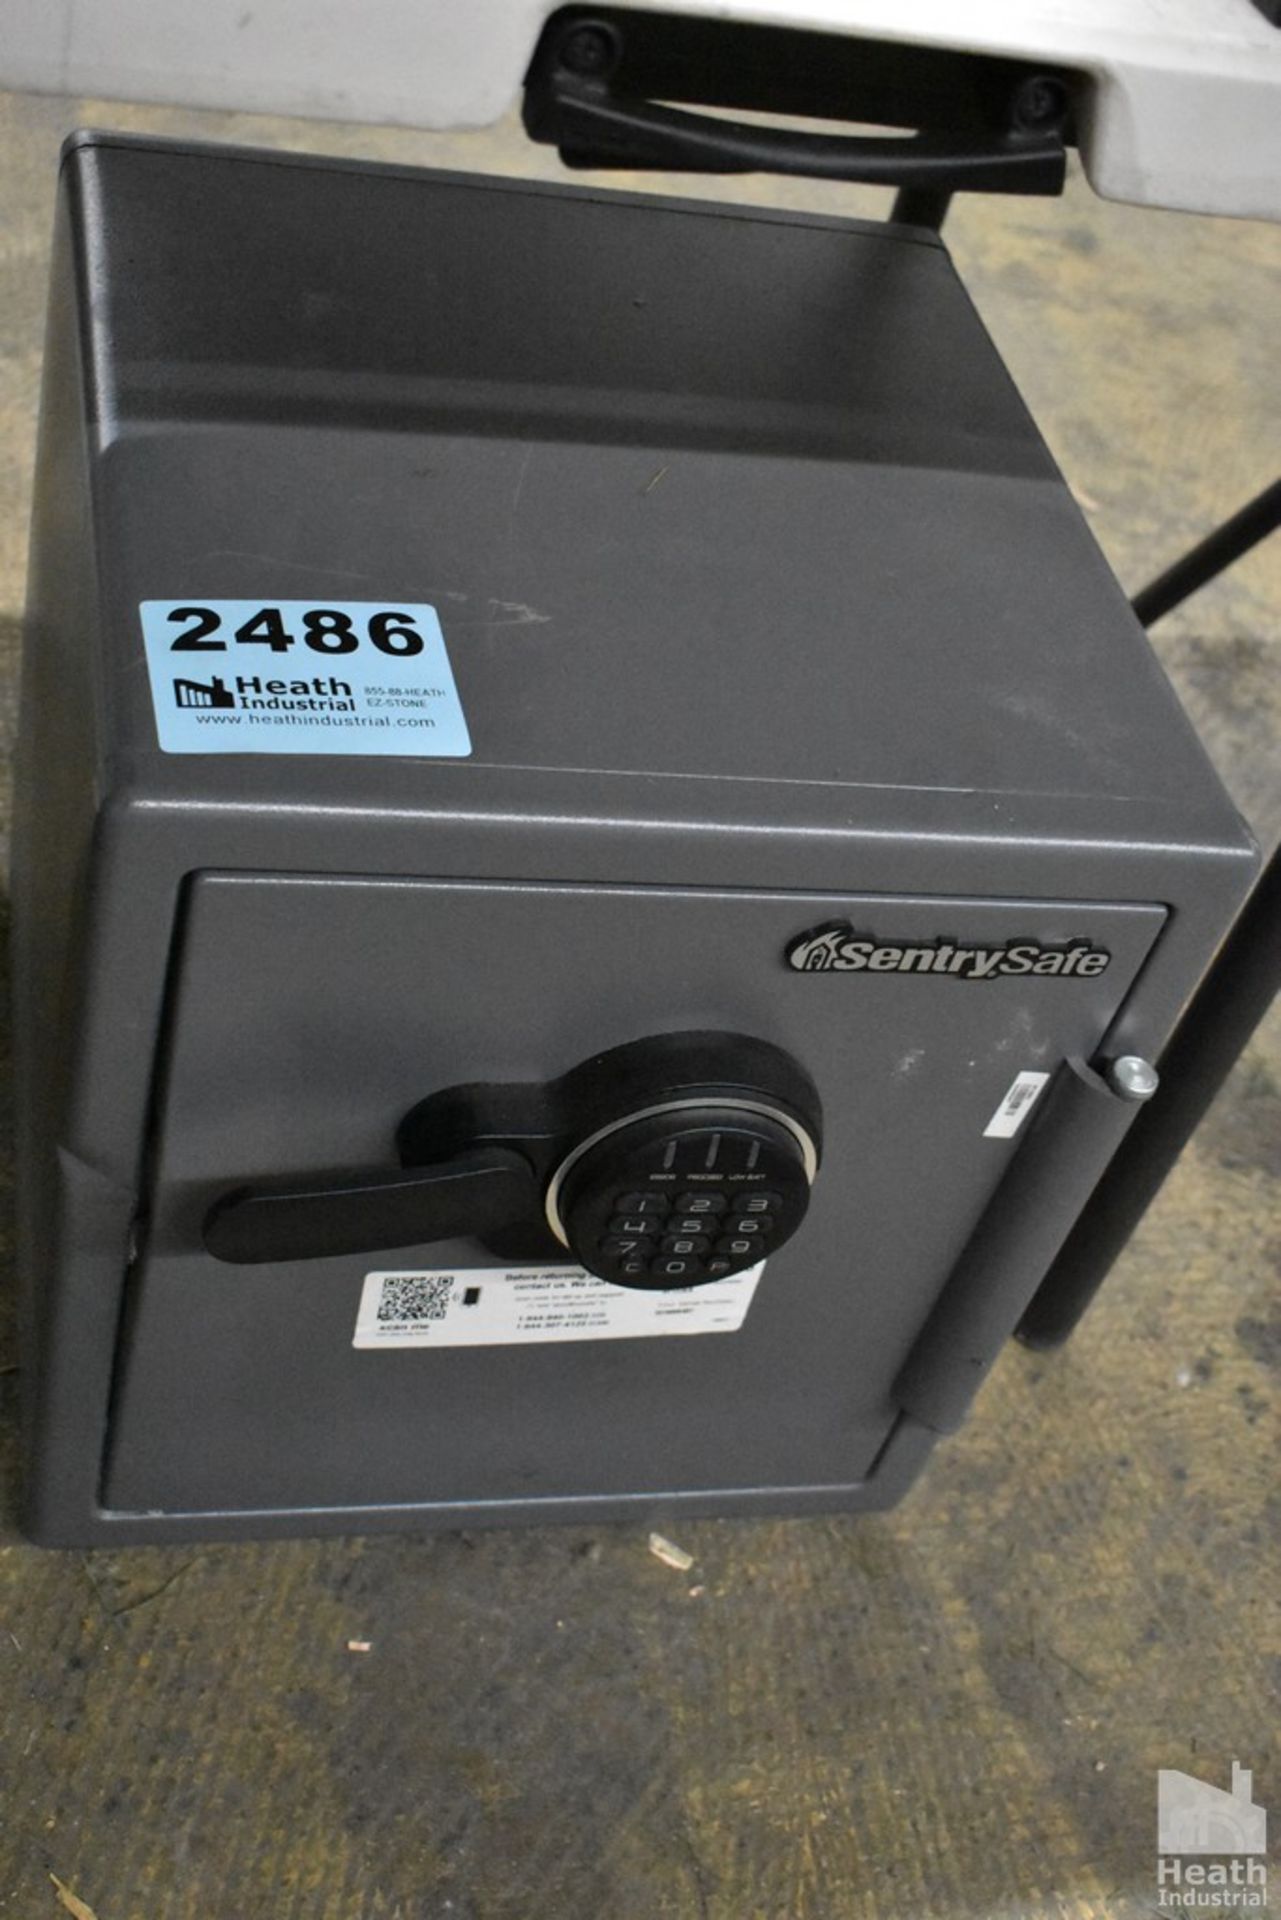 SENTRY SAFE, MODEL SF123ES, 16" X 18" X 17", LOCKED, NO KEY, NO PIN, CONTENTS UNKNOWN - Image 2 of 2